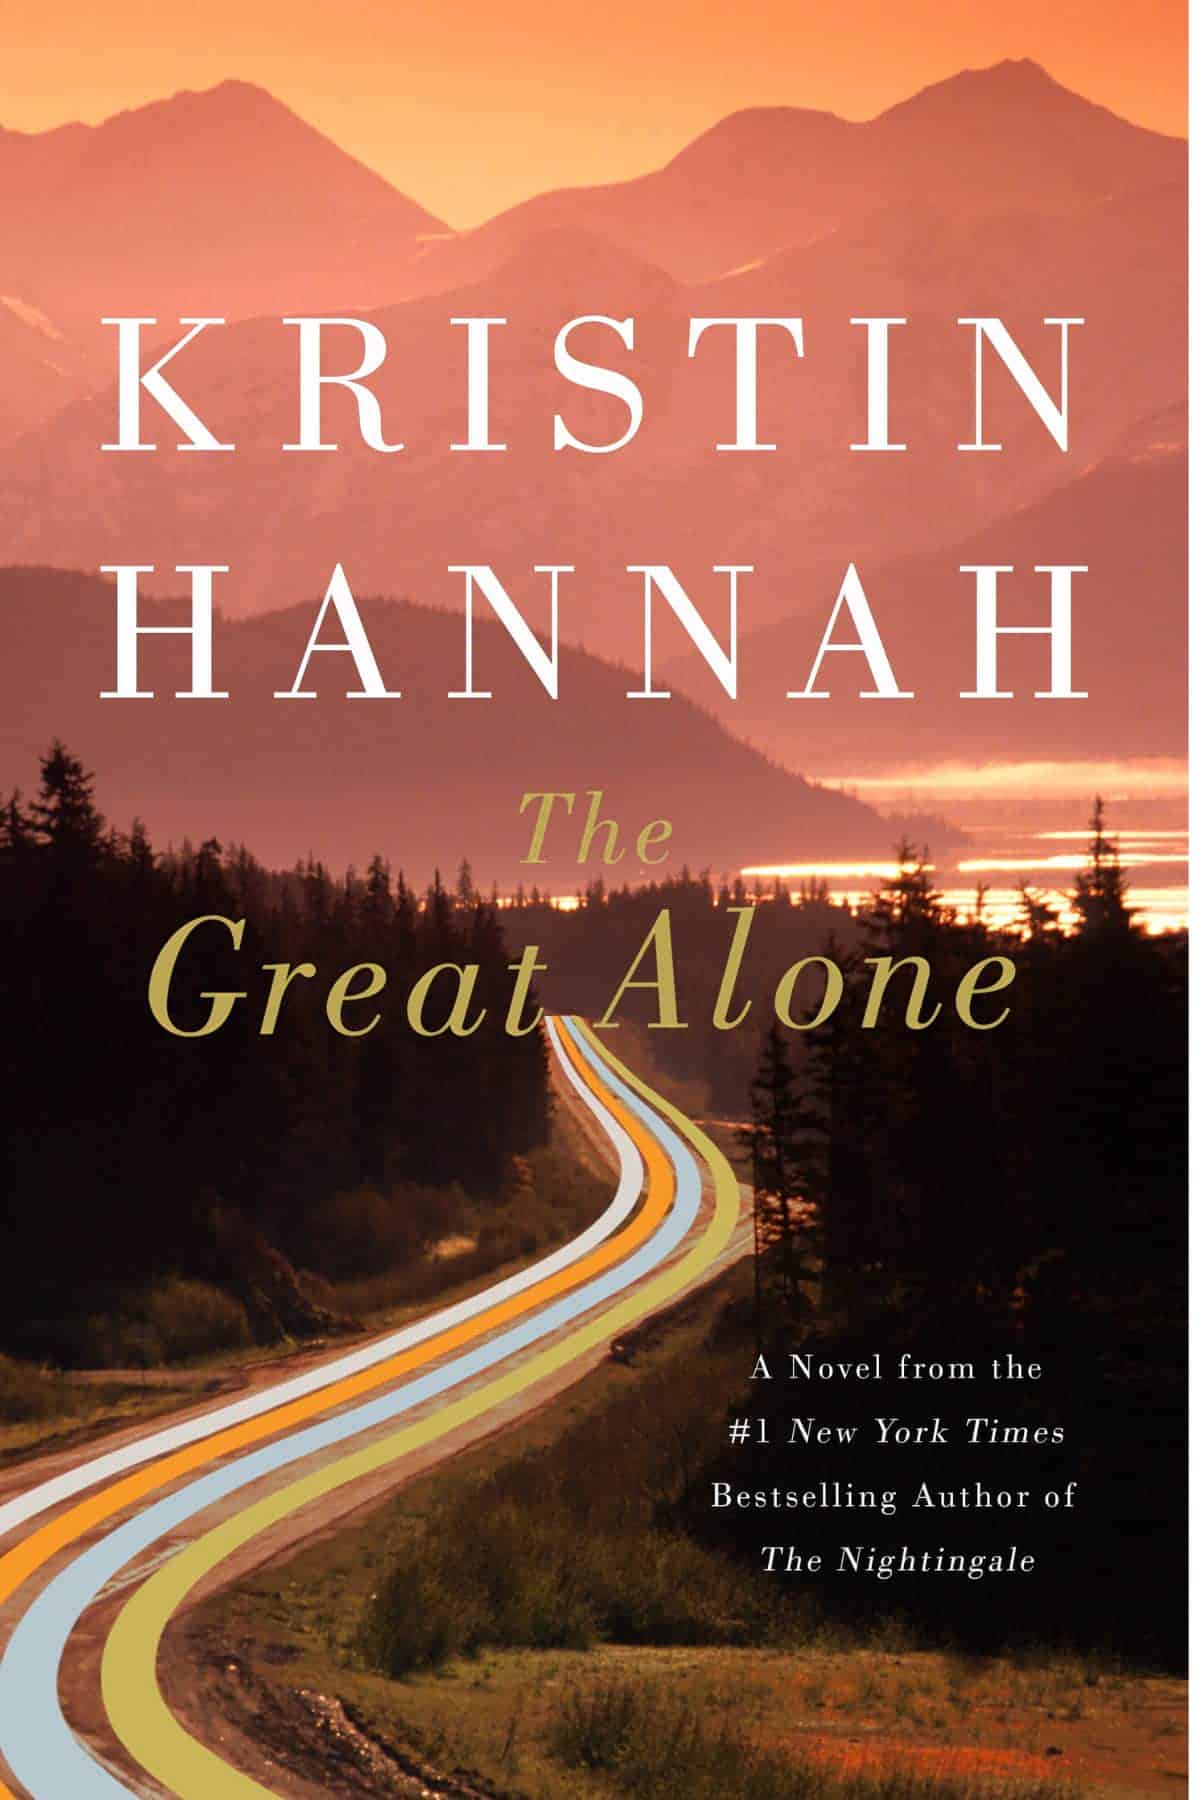 Mom: The Great Alone by Kristin Hannah | Top Kindle Books of 2018 | Gift Ideas For Each Member of the Family